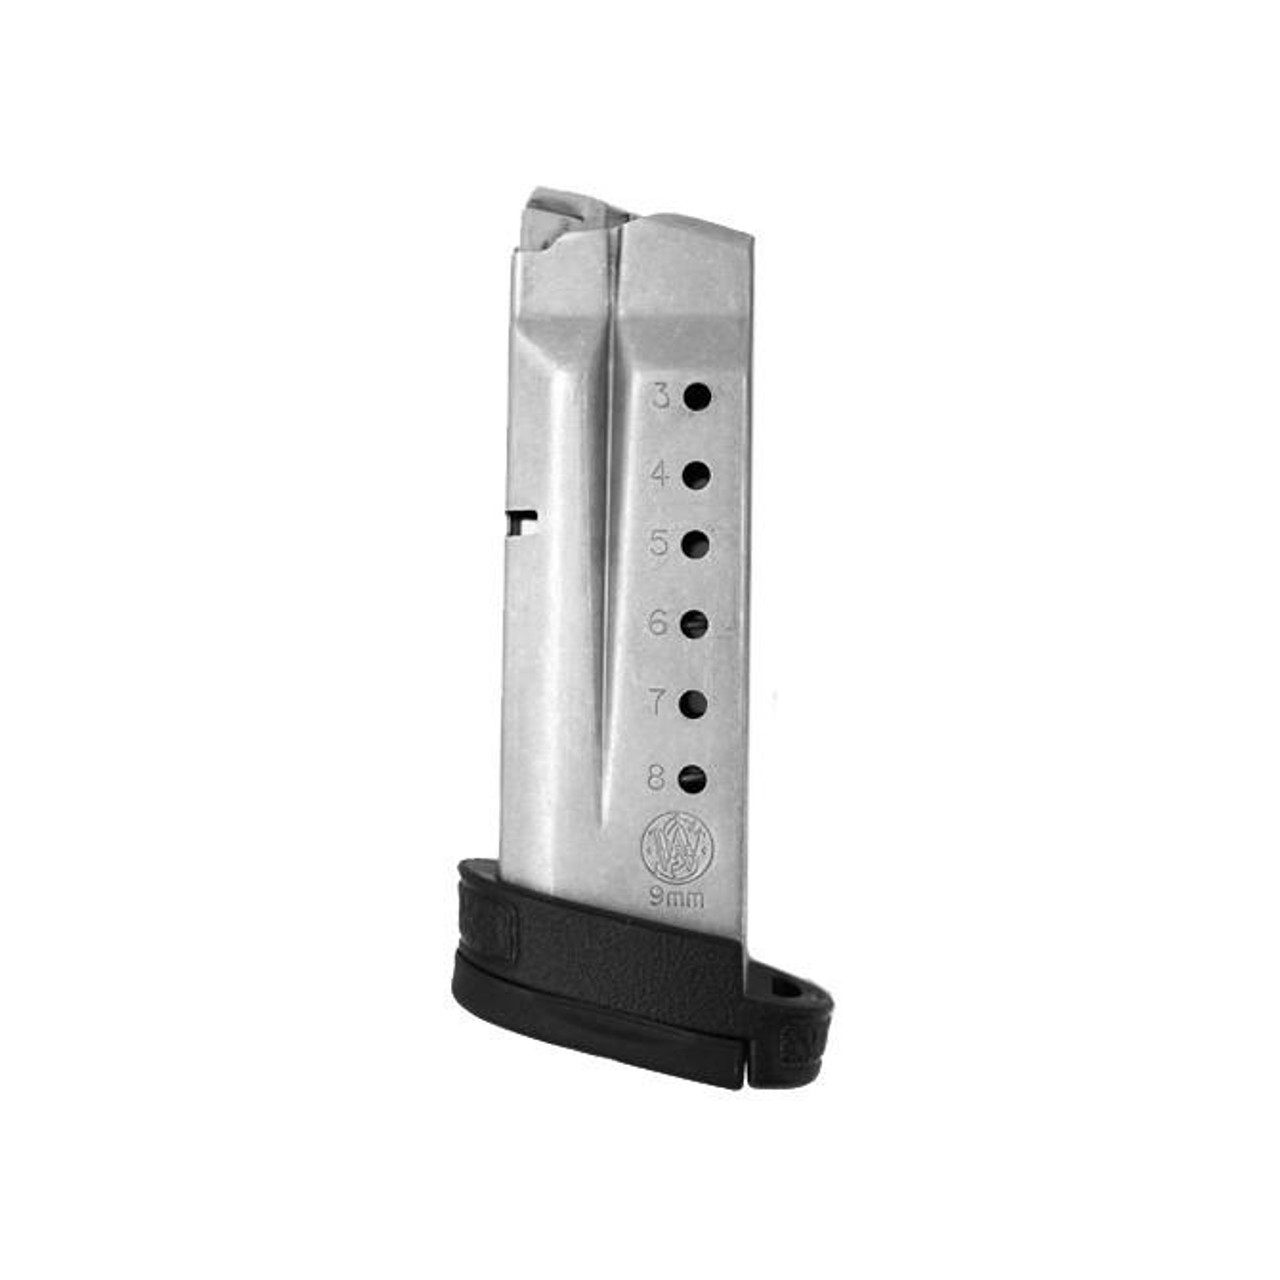 S&W Smith & Wesson M&P 45 SHIELD .45 ACP 6 Round MAGAZINE 3005566 STAINLESS